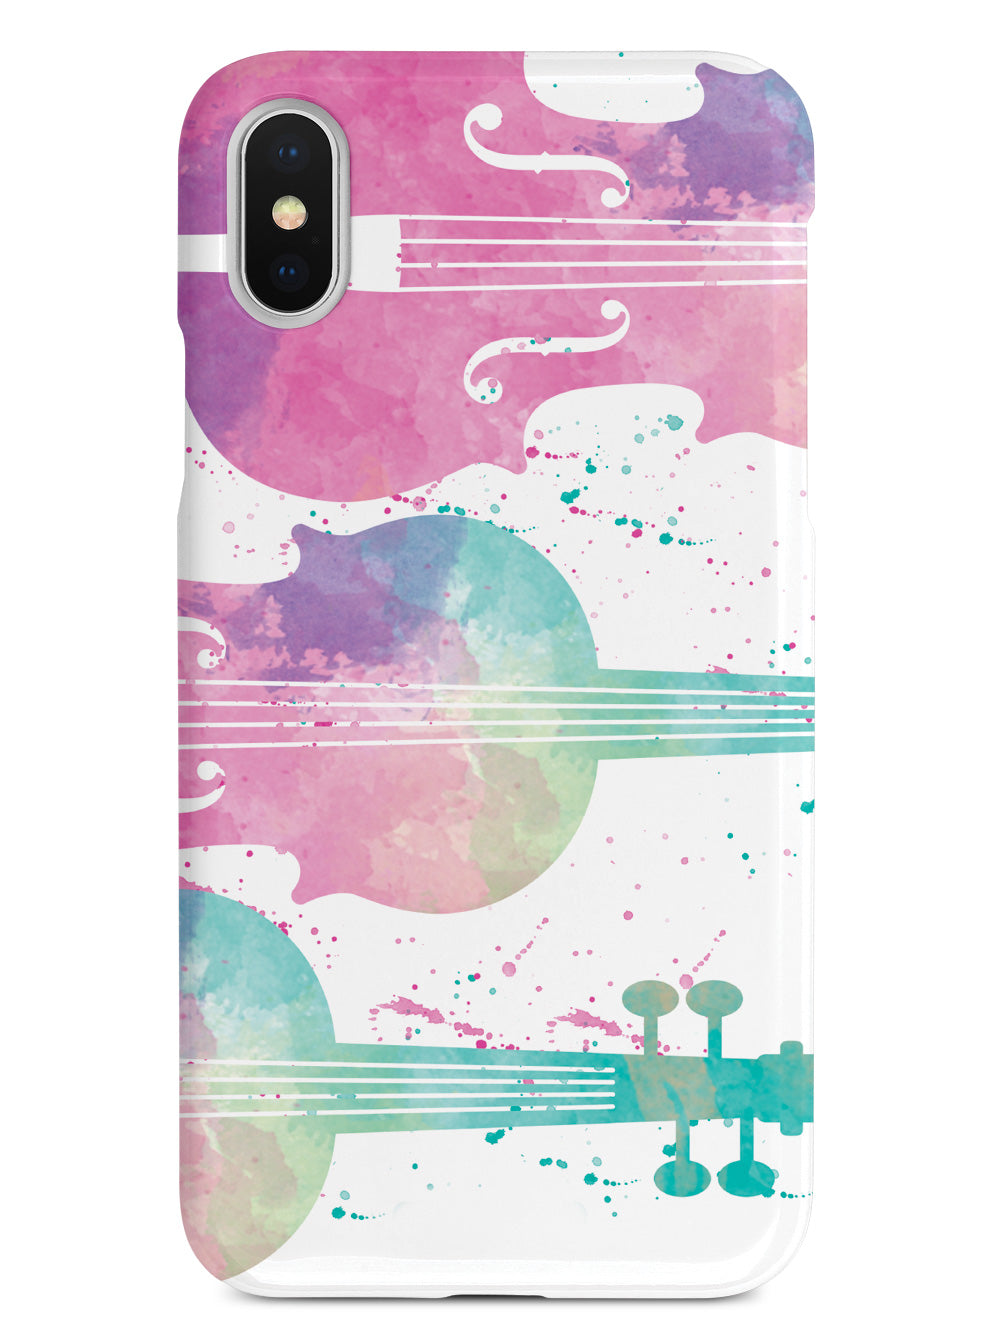 String Instrument Silhouette - Watercolor Case